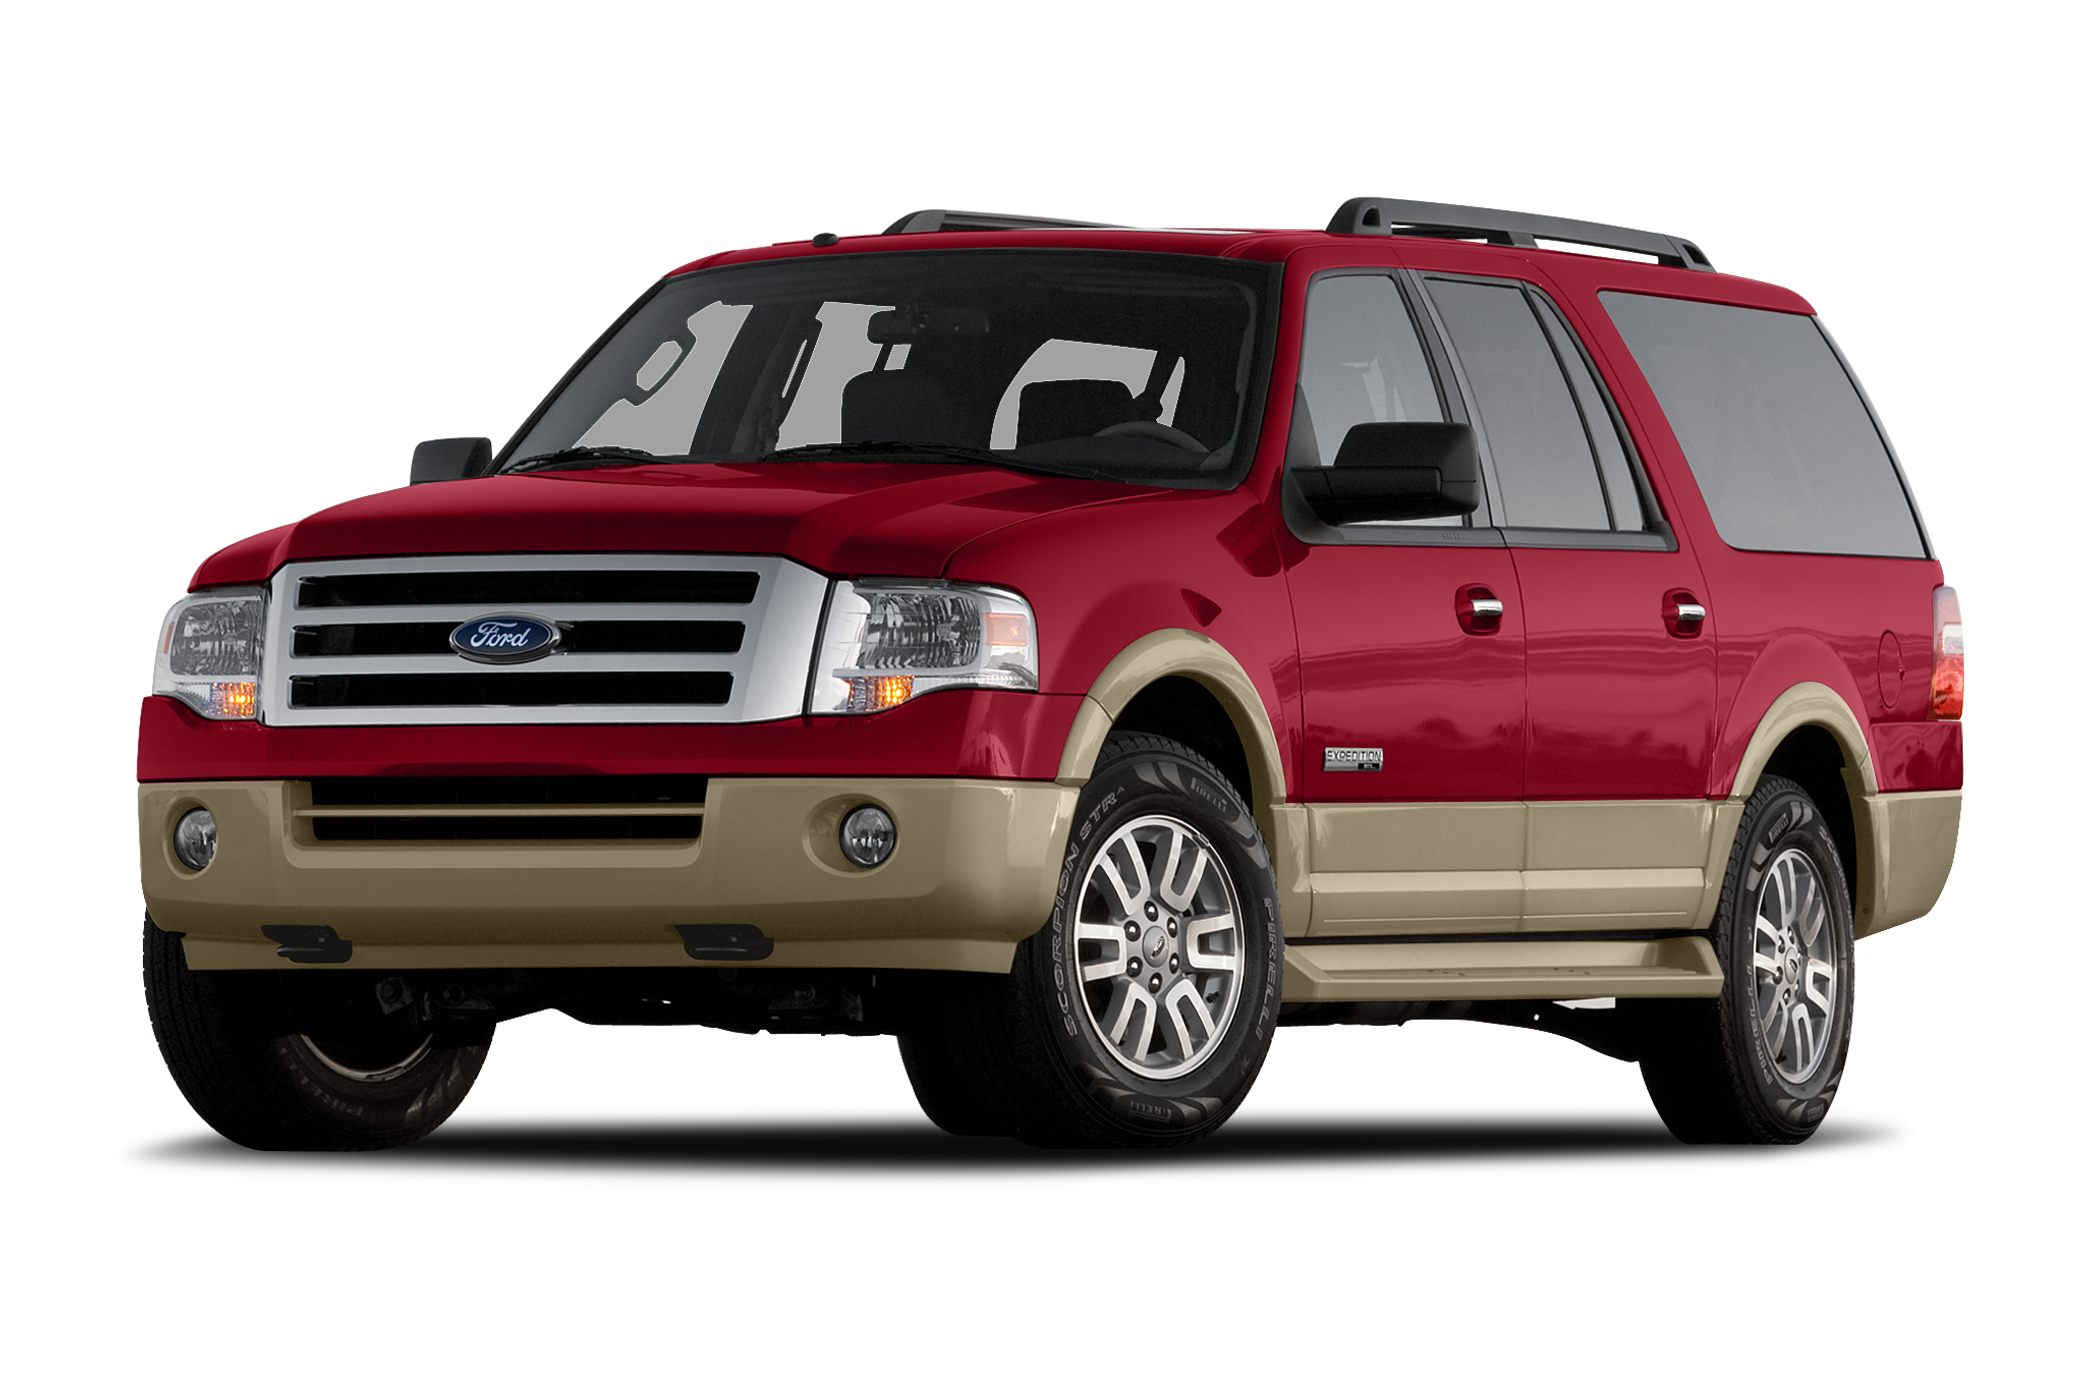 2008 Ford Expedition El Xlt 4dr 4x4 Pictures